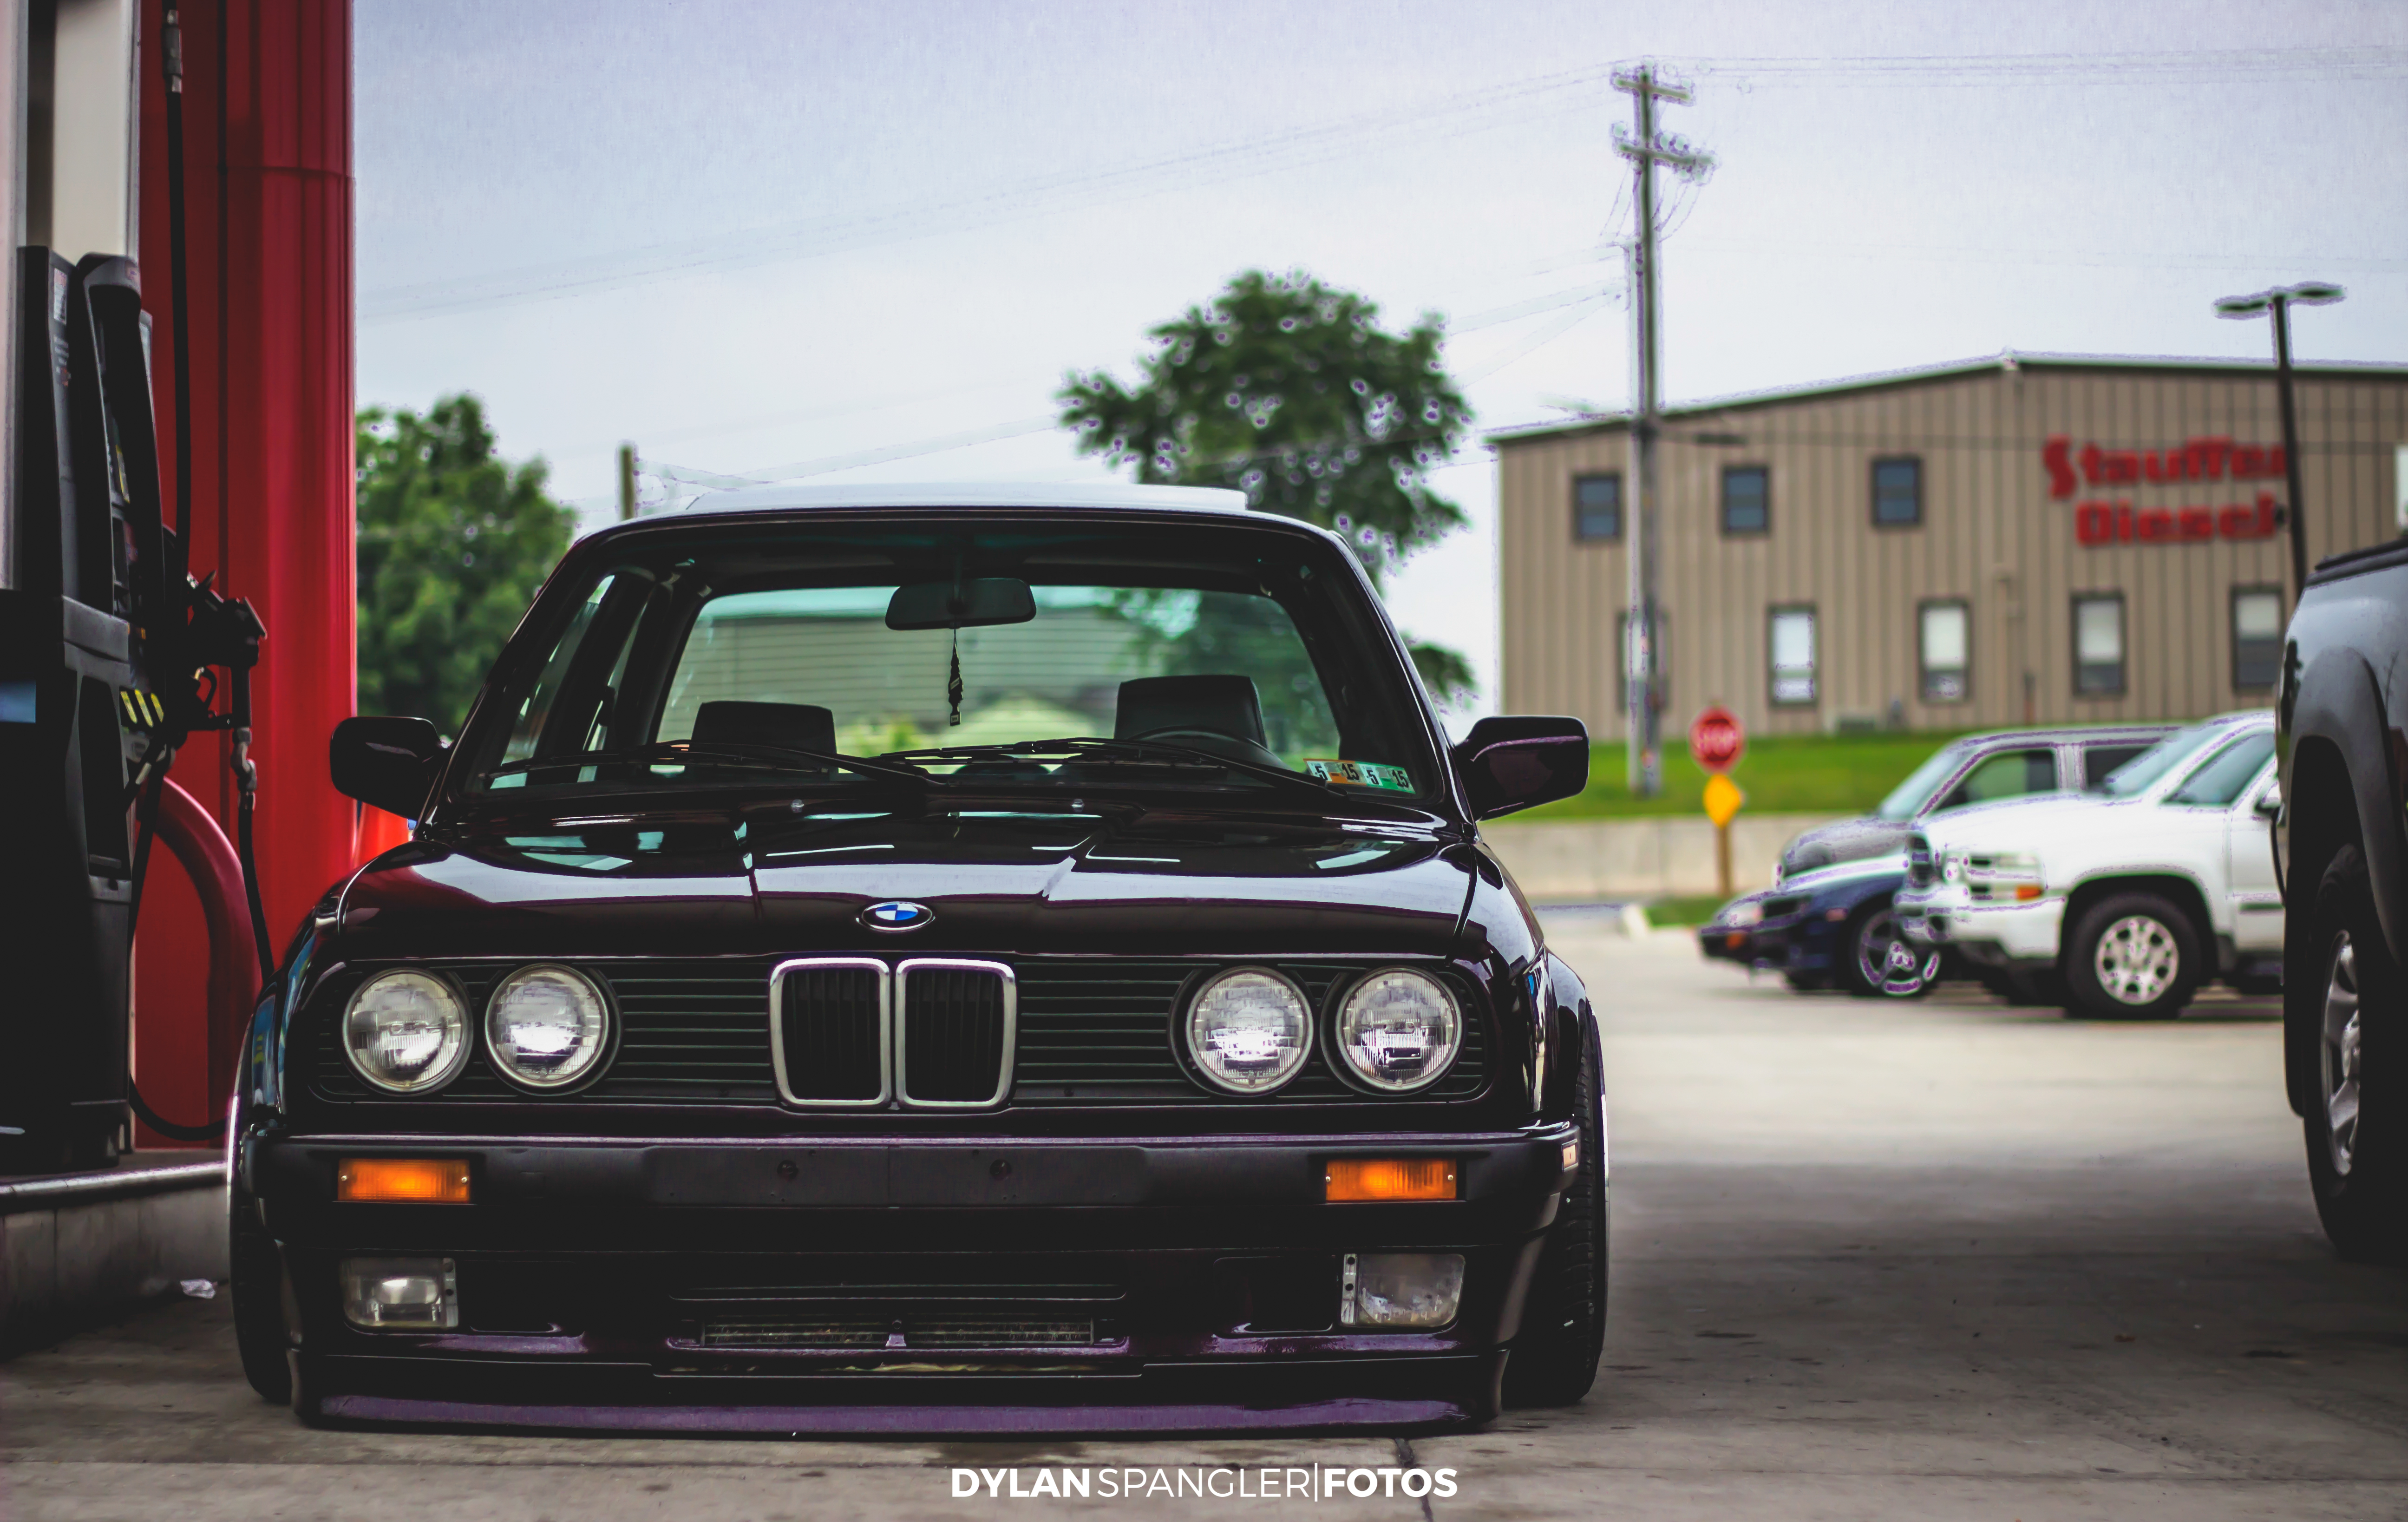 bmw, cars, front bumper, gas station